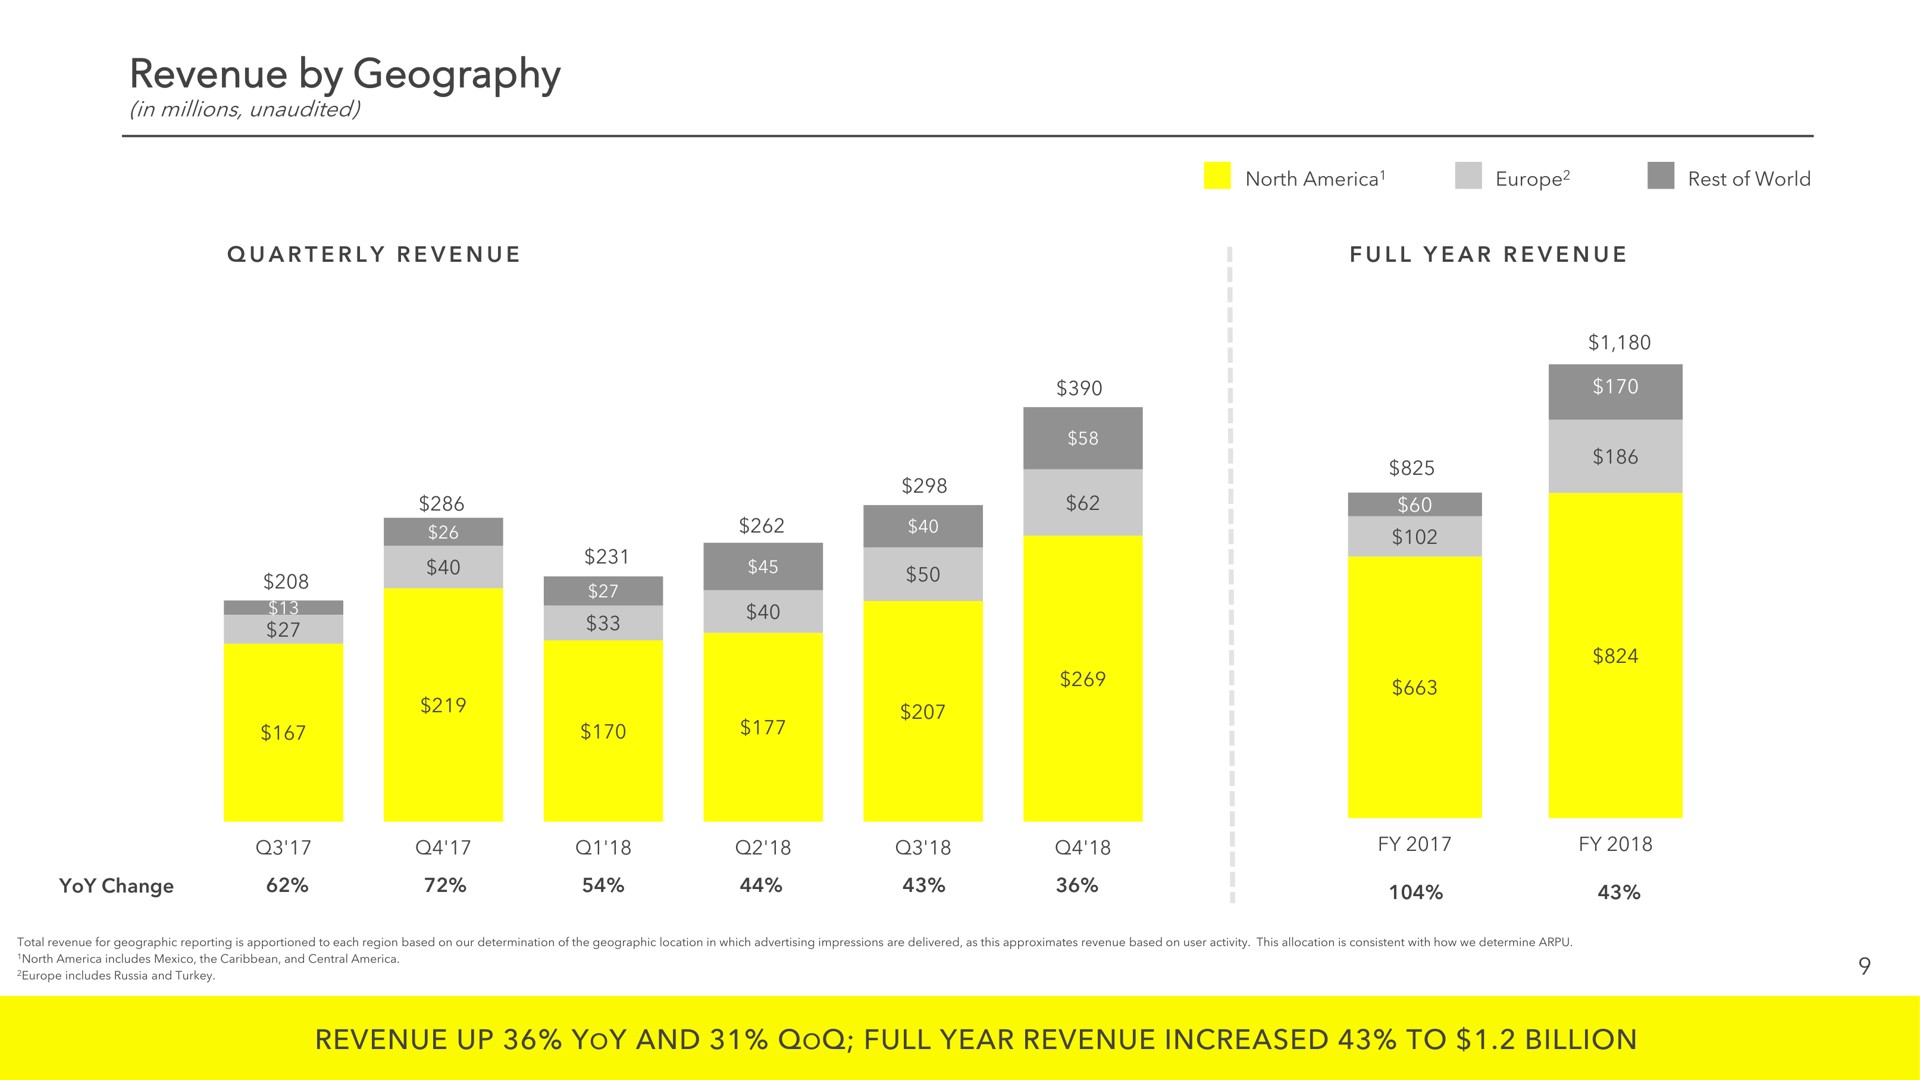 revenue by geography revenue up yoy and full year revenue increased to billion | Snap Inc